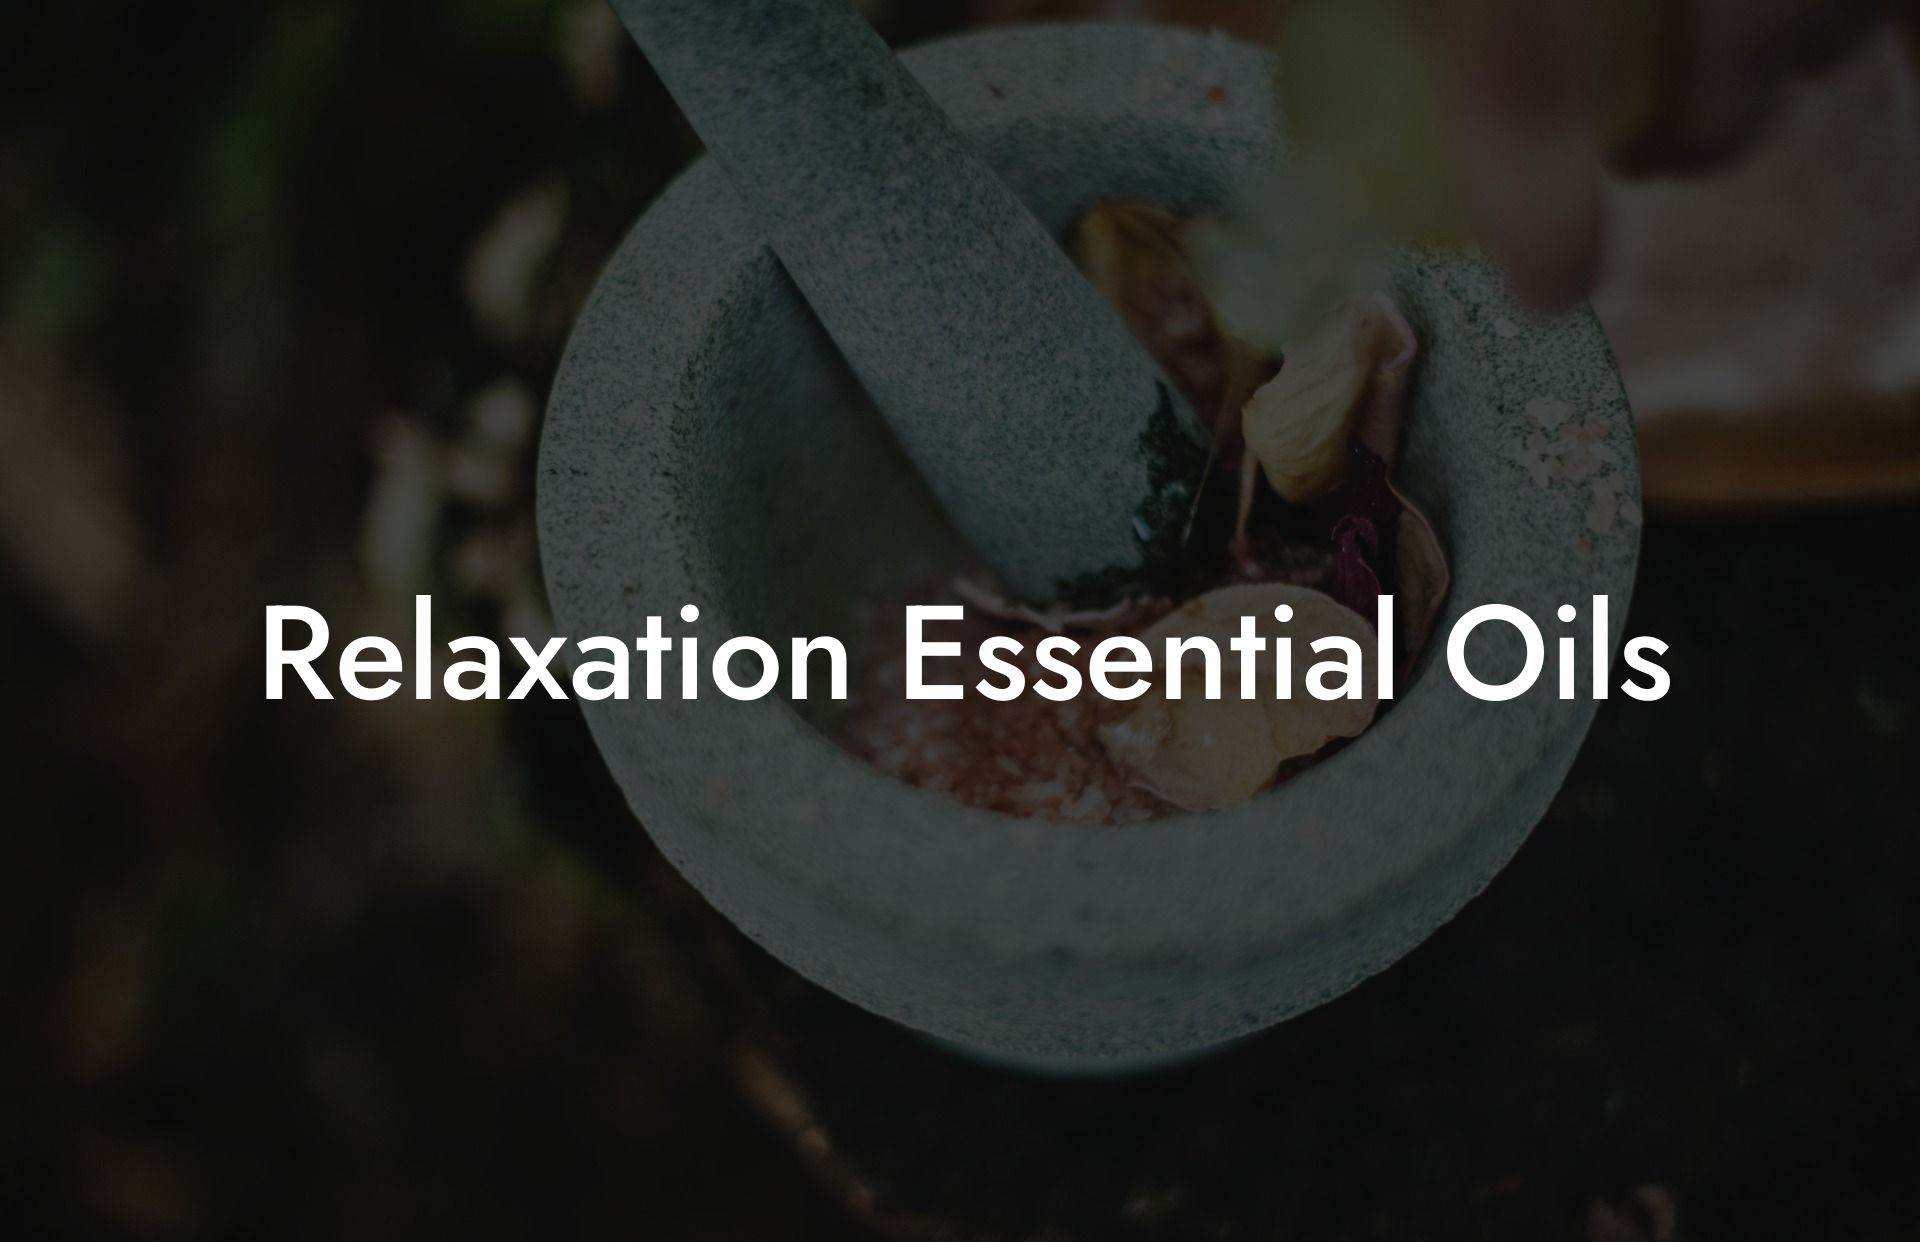 Relaxation Essential Oils